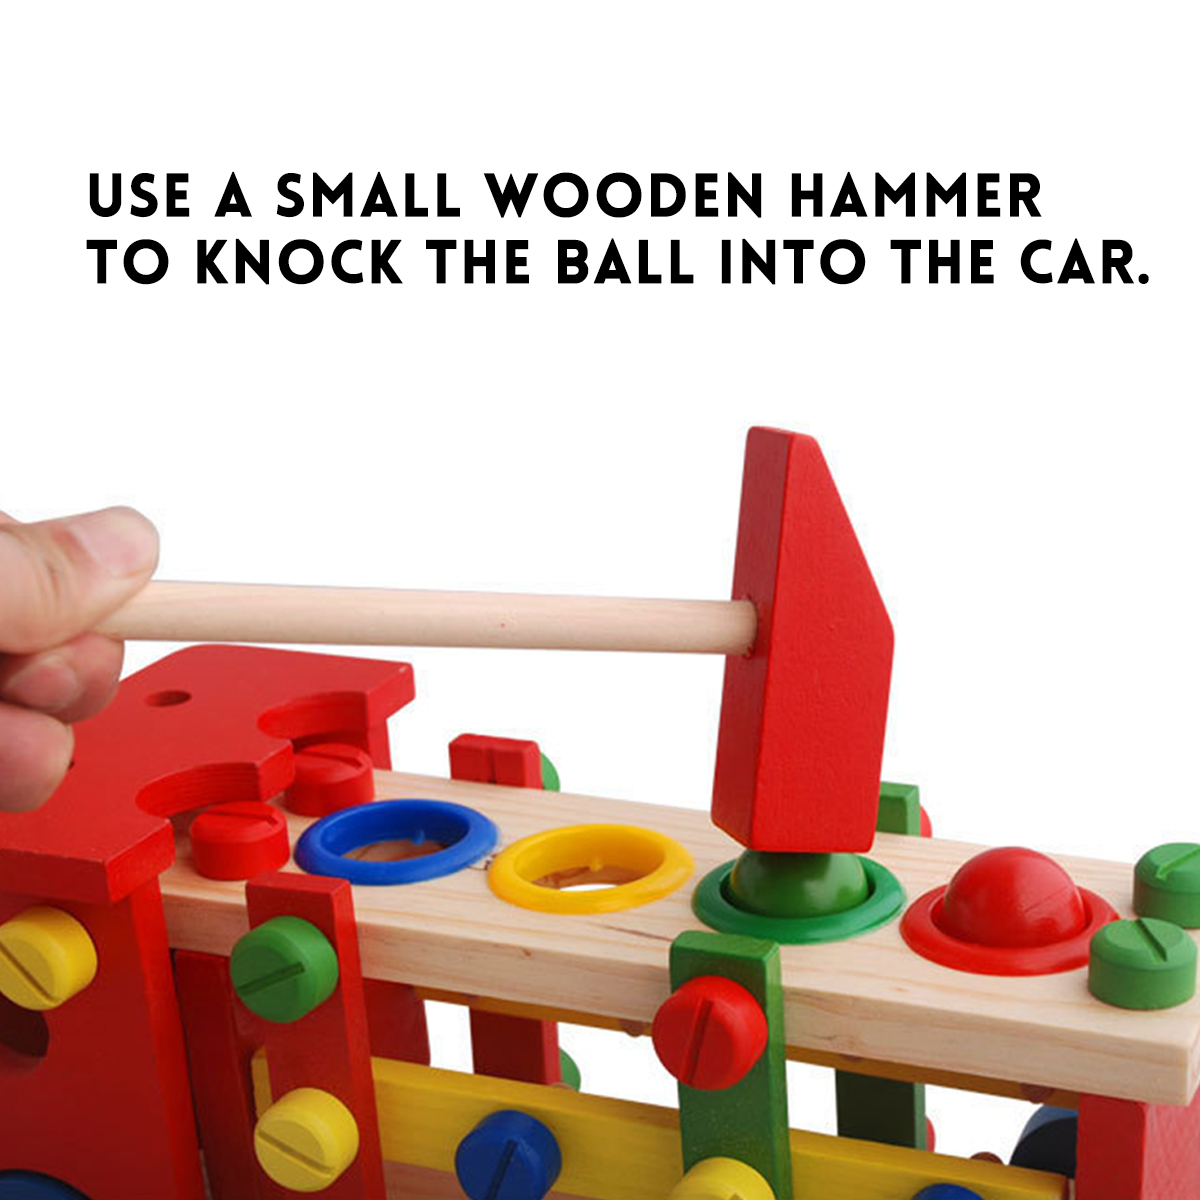 DIY-Educational-Toys-Kids-Exercise-Practical-Wooden-IQ-Game-Car-Assemble-Building-Gift-Training-Brai-1598139-6